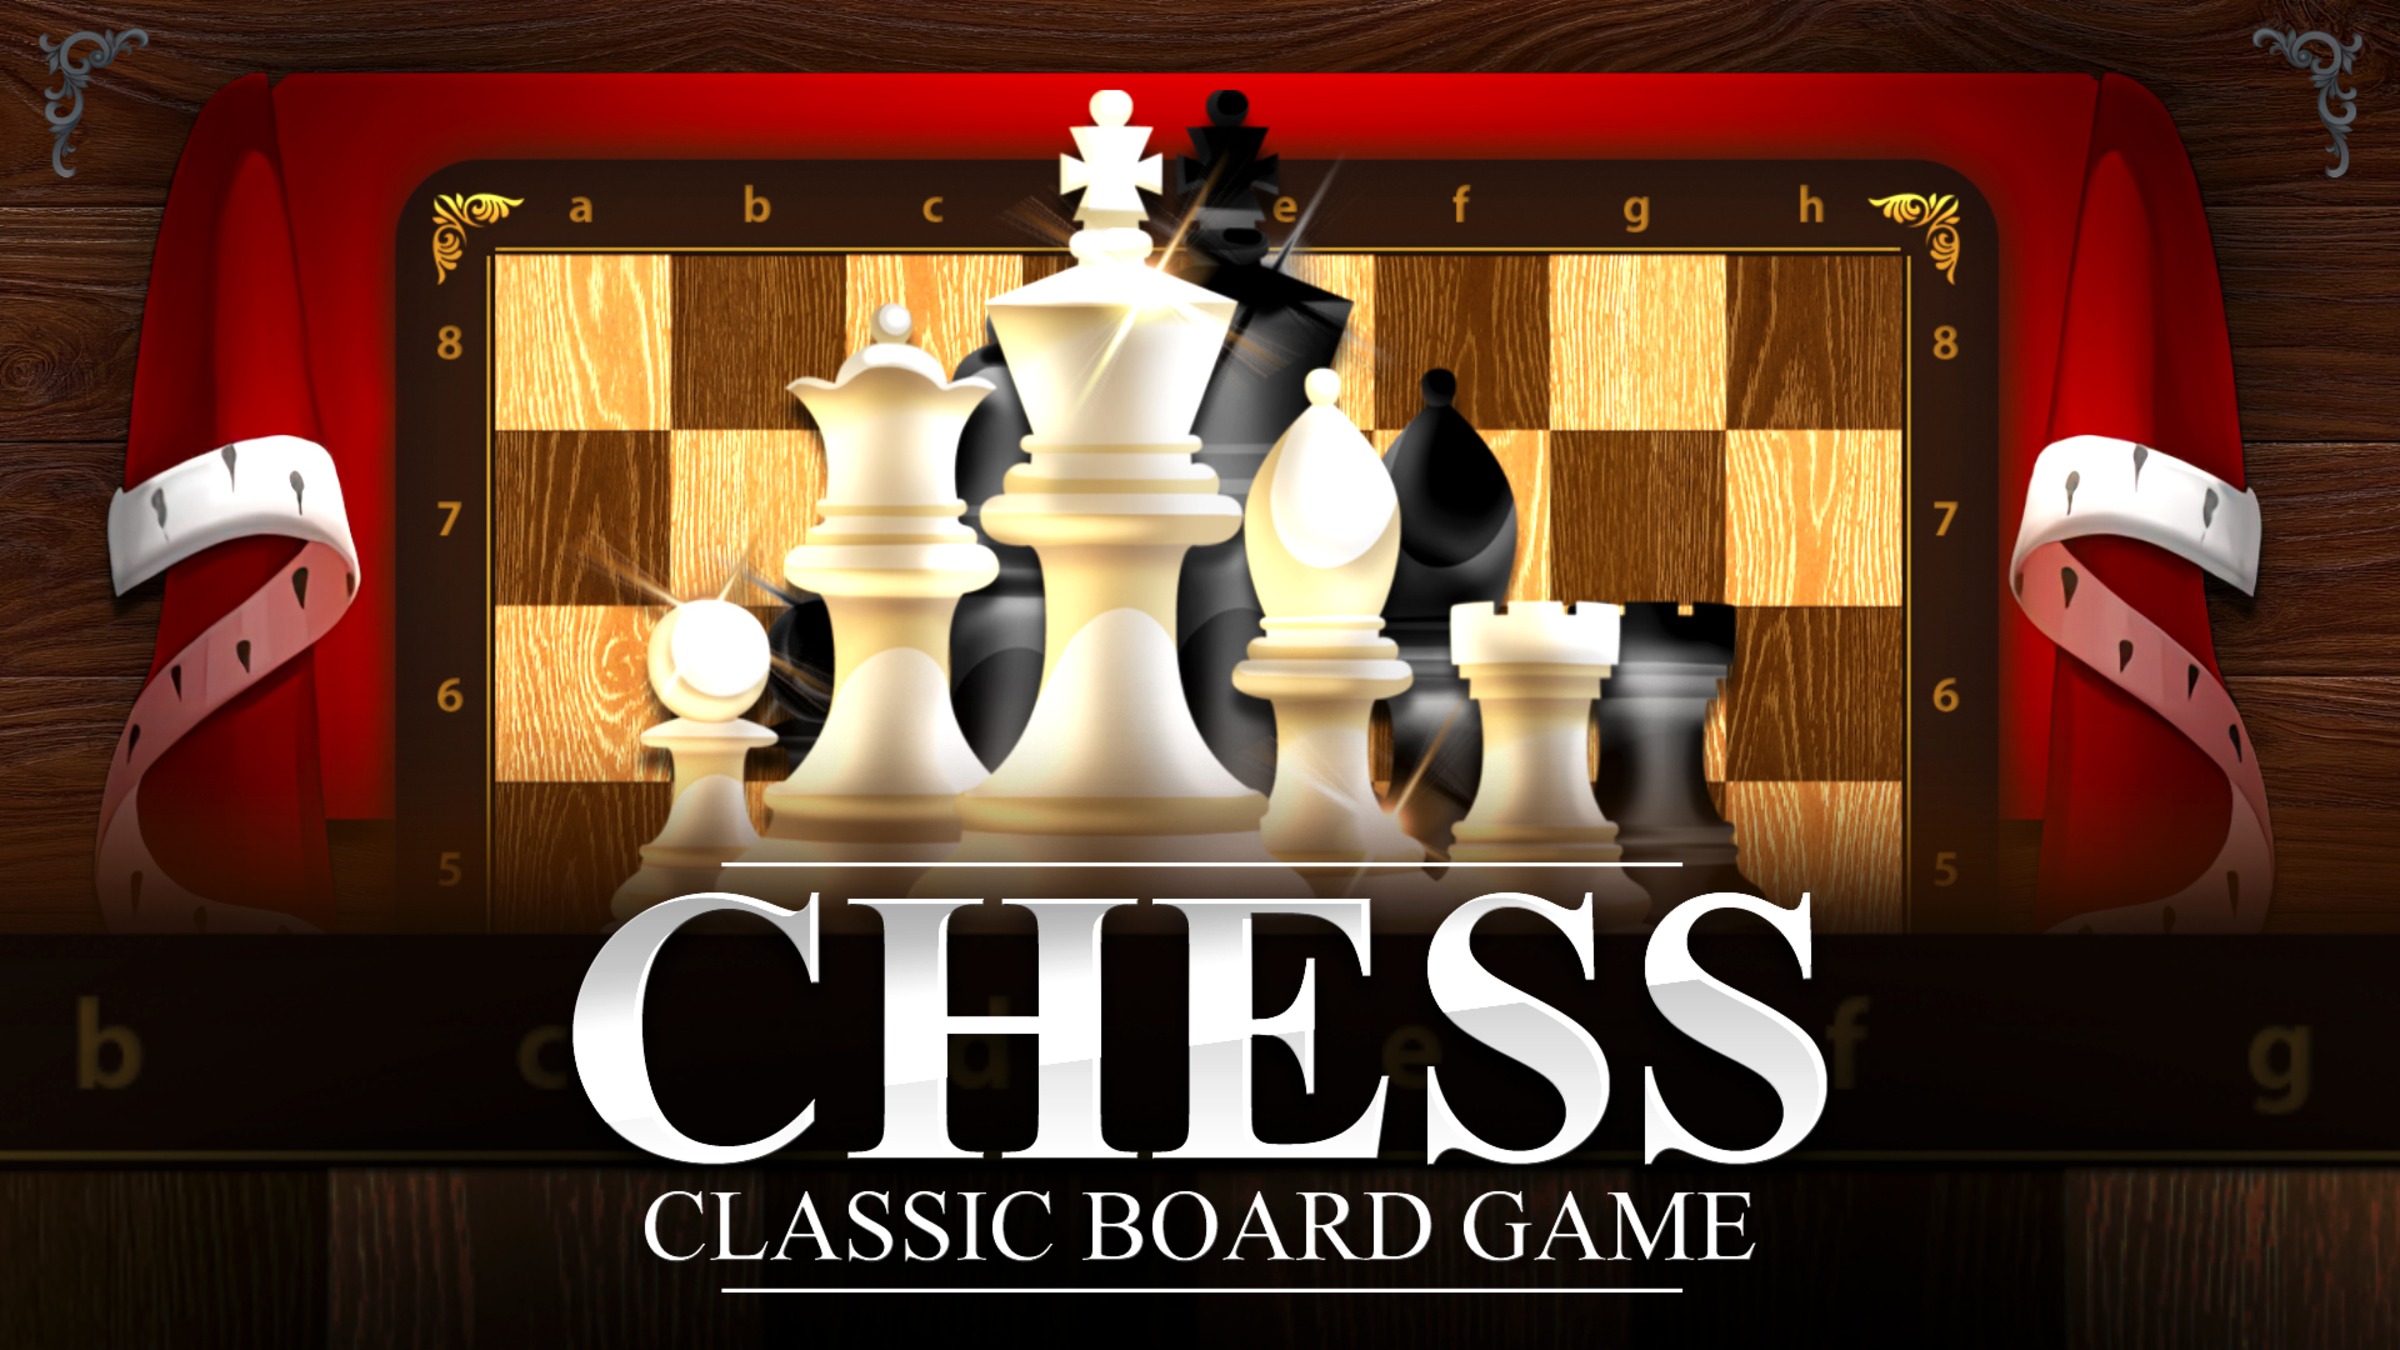 Chess Game Online - Play Free Chess Games for Brain